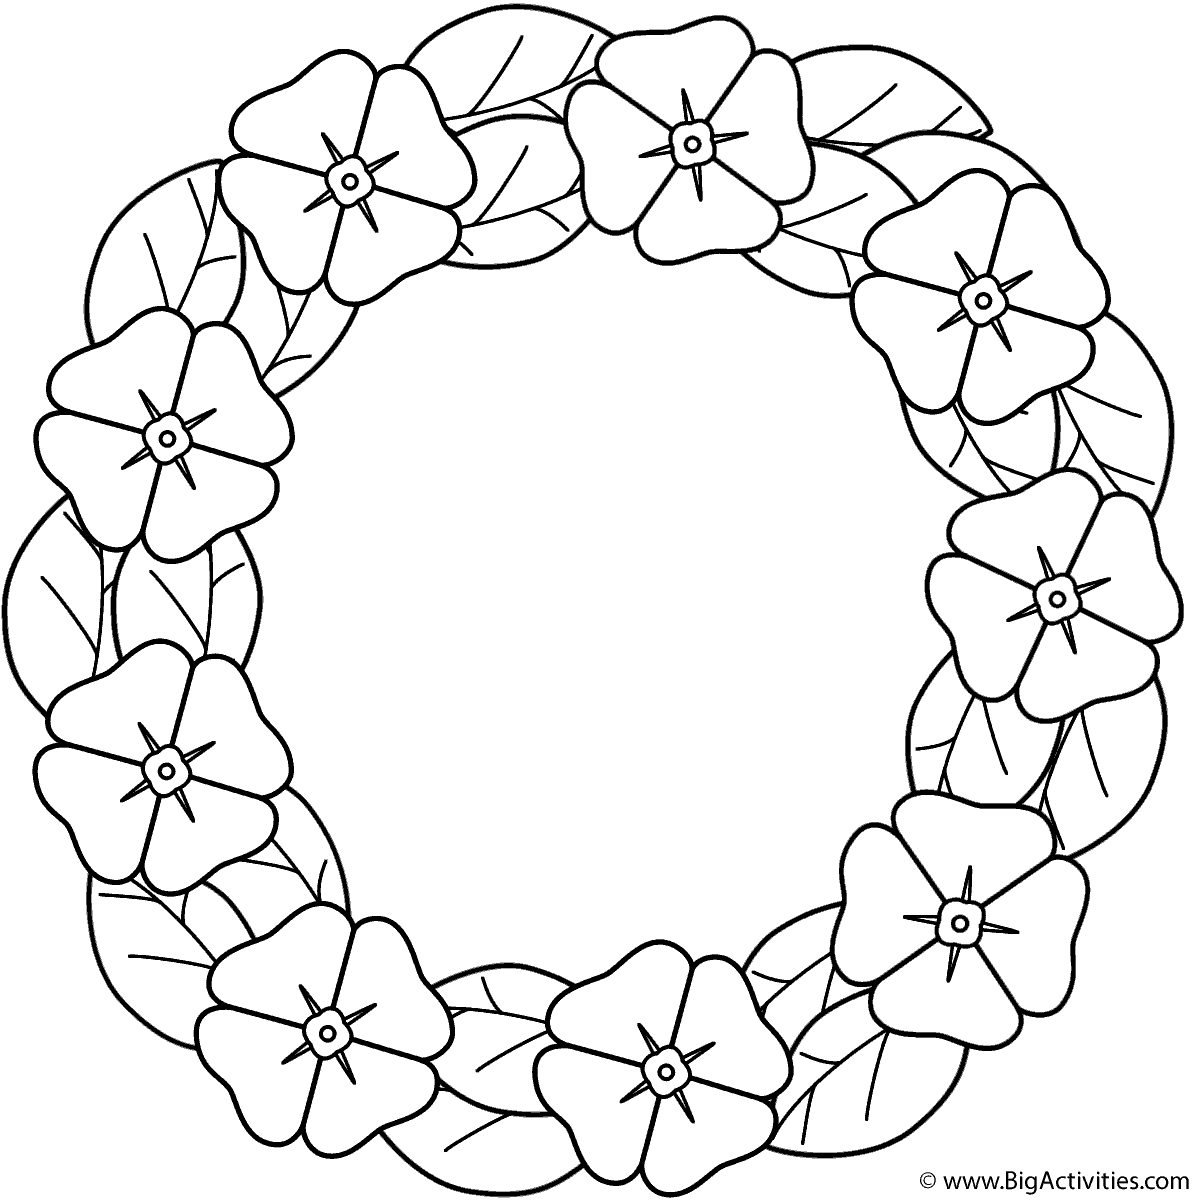 Poppy wreath - Coloring Page (Anzac Day)